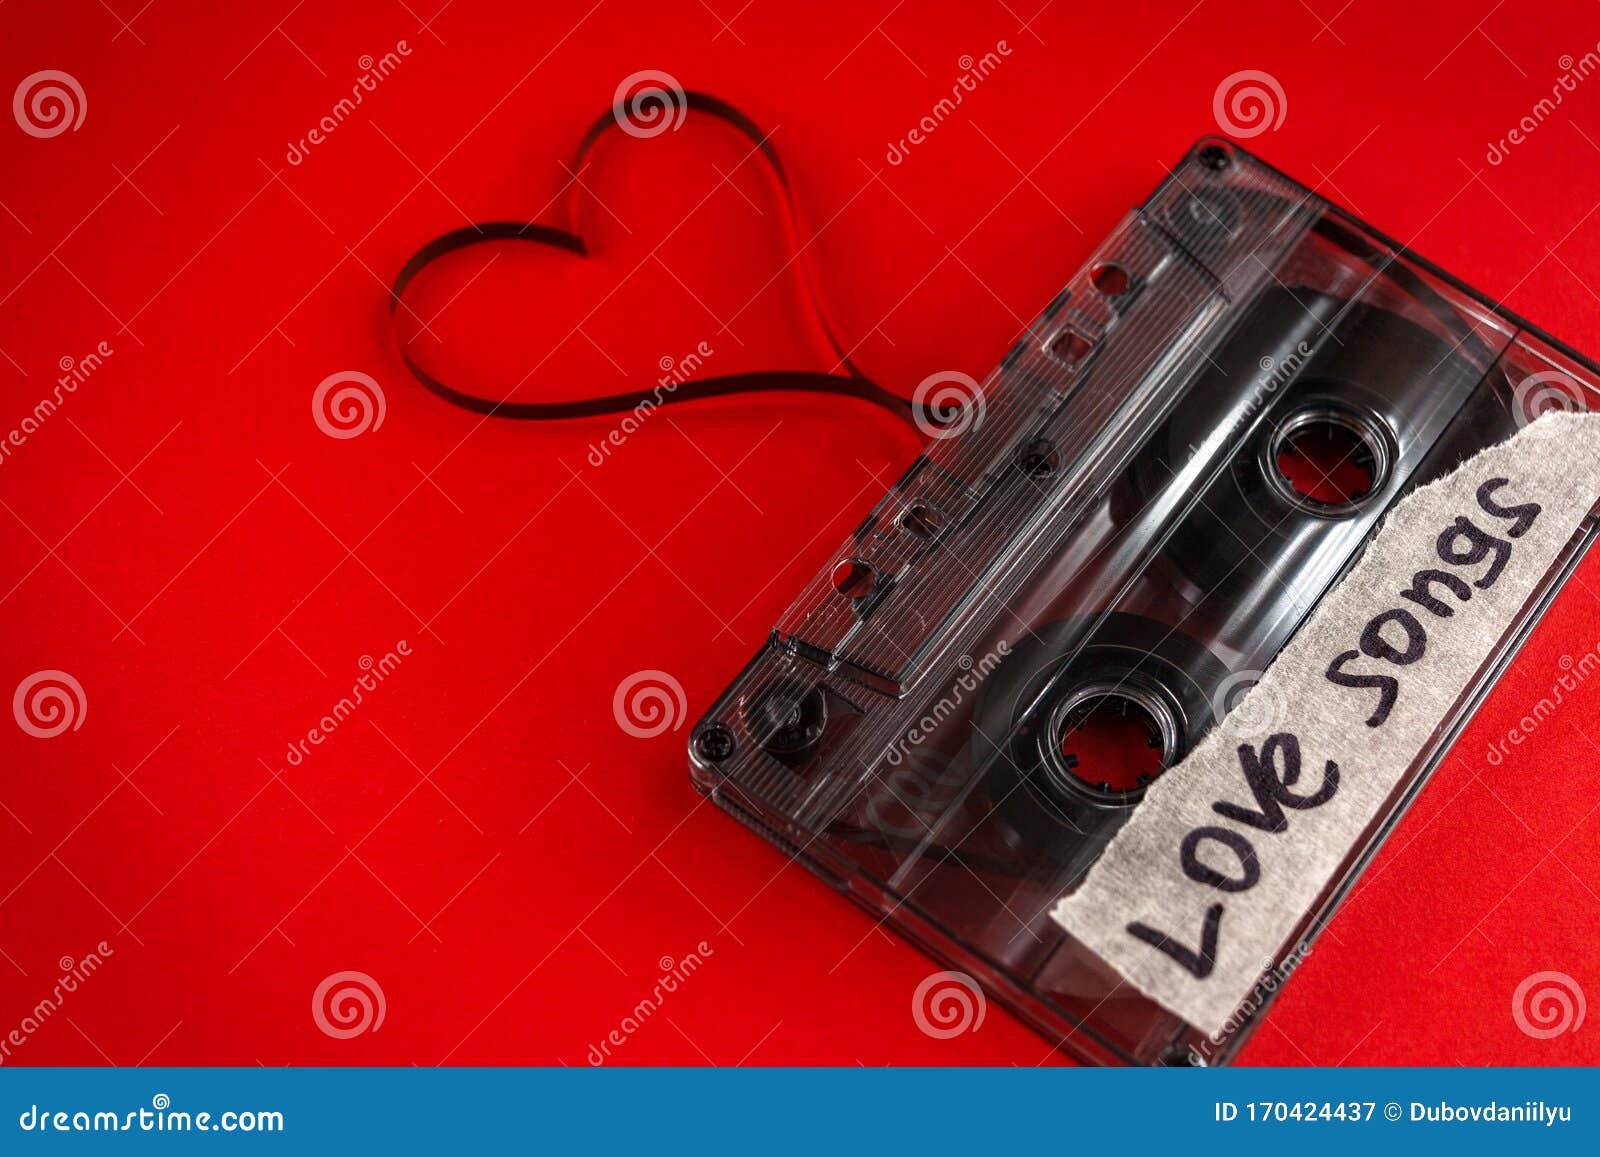 Vintage Old Film Music Cassette on a Trendy Pink Red Background with the  Inscription Love Song, Background Music, Music Lovers Stock Image - Image  of electronics, board: 170424437